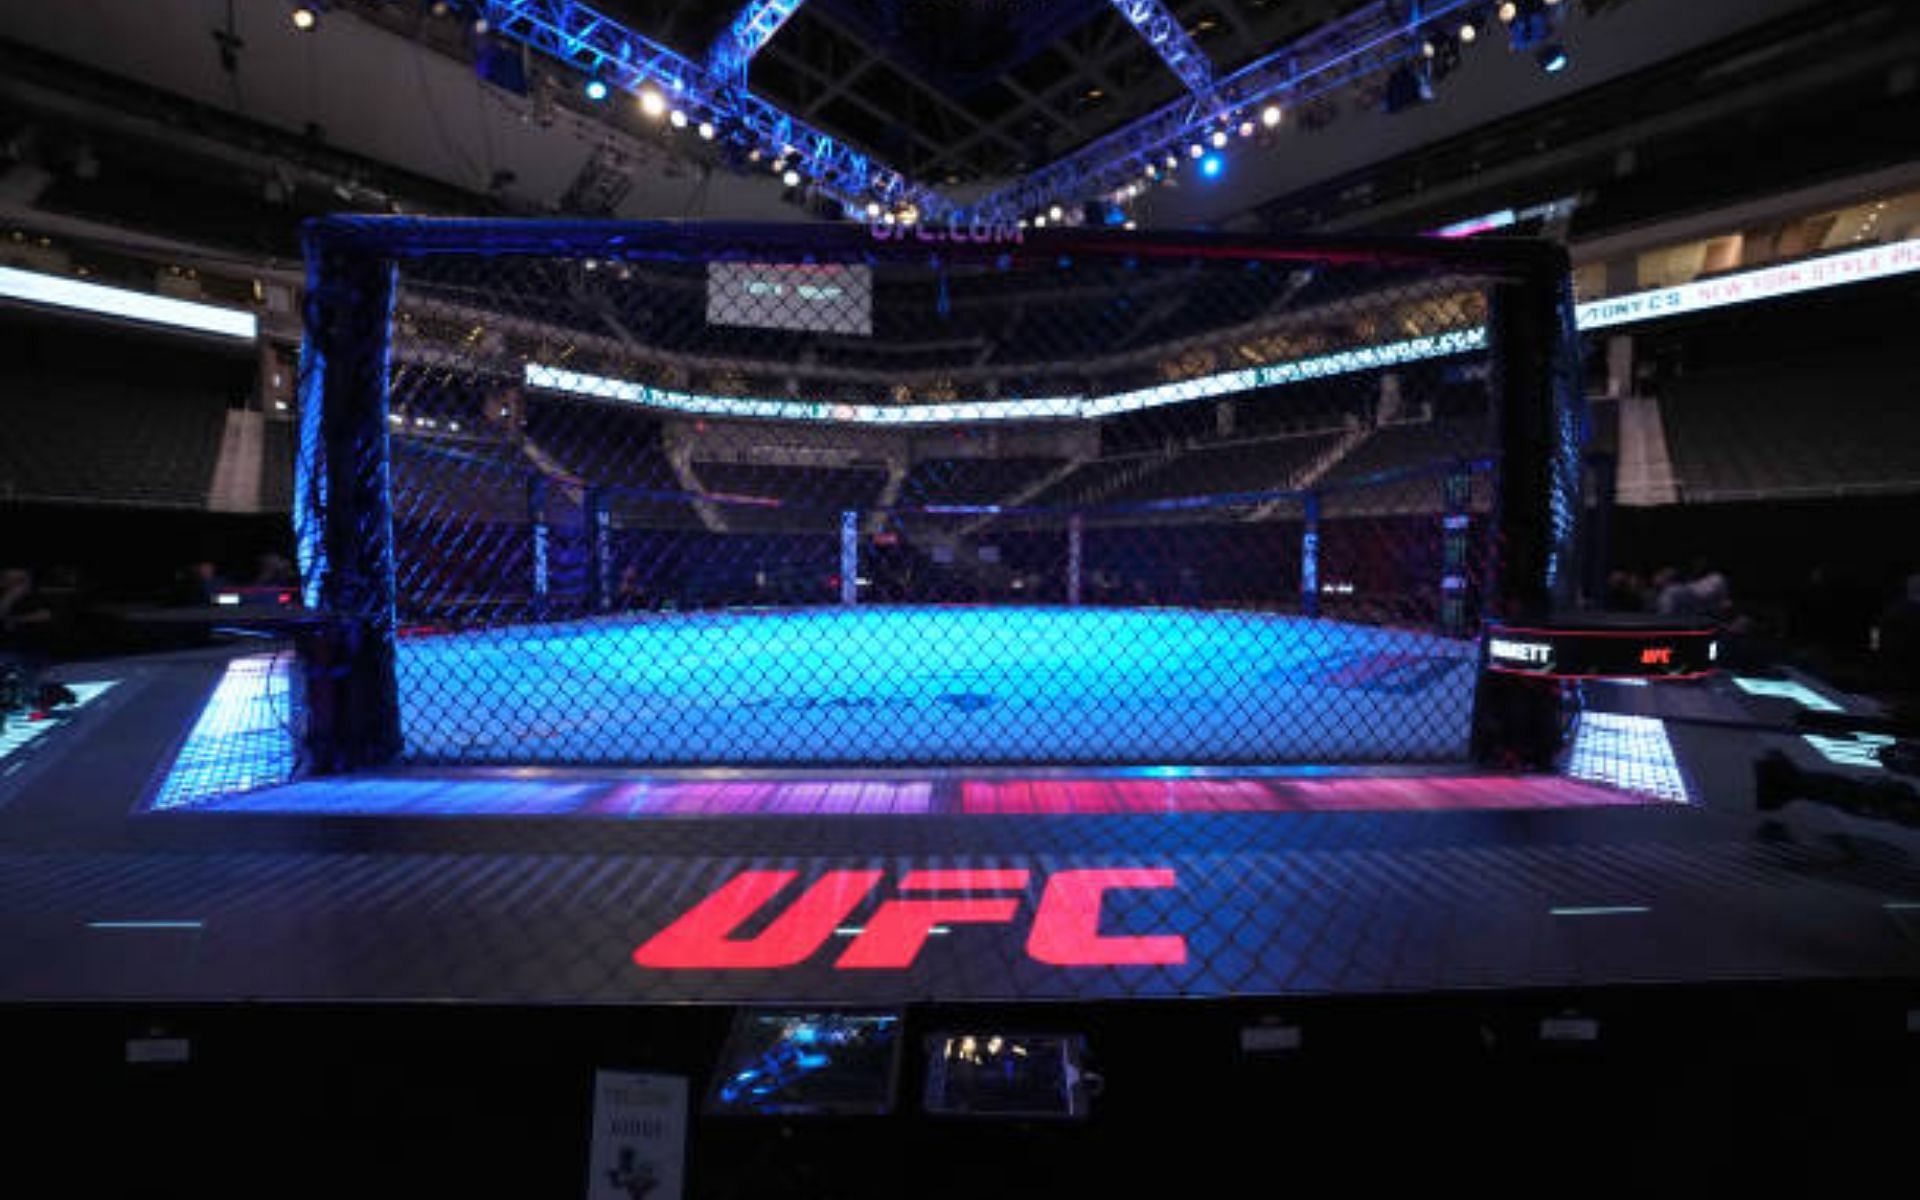 UFC octagon [Image courtesy: @GettyImages]